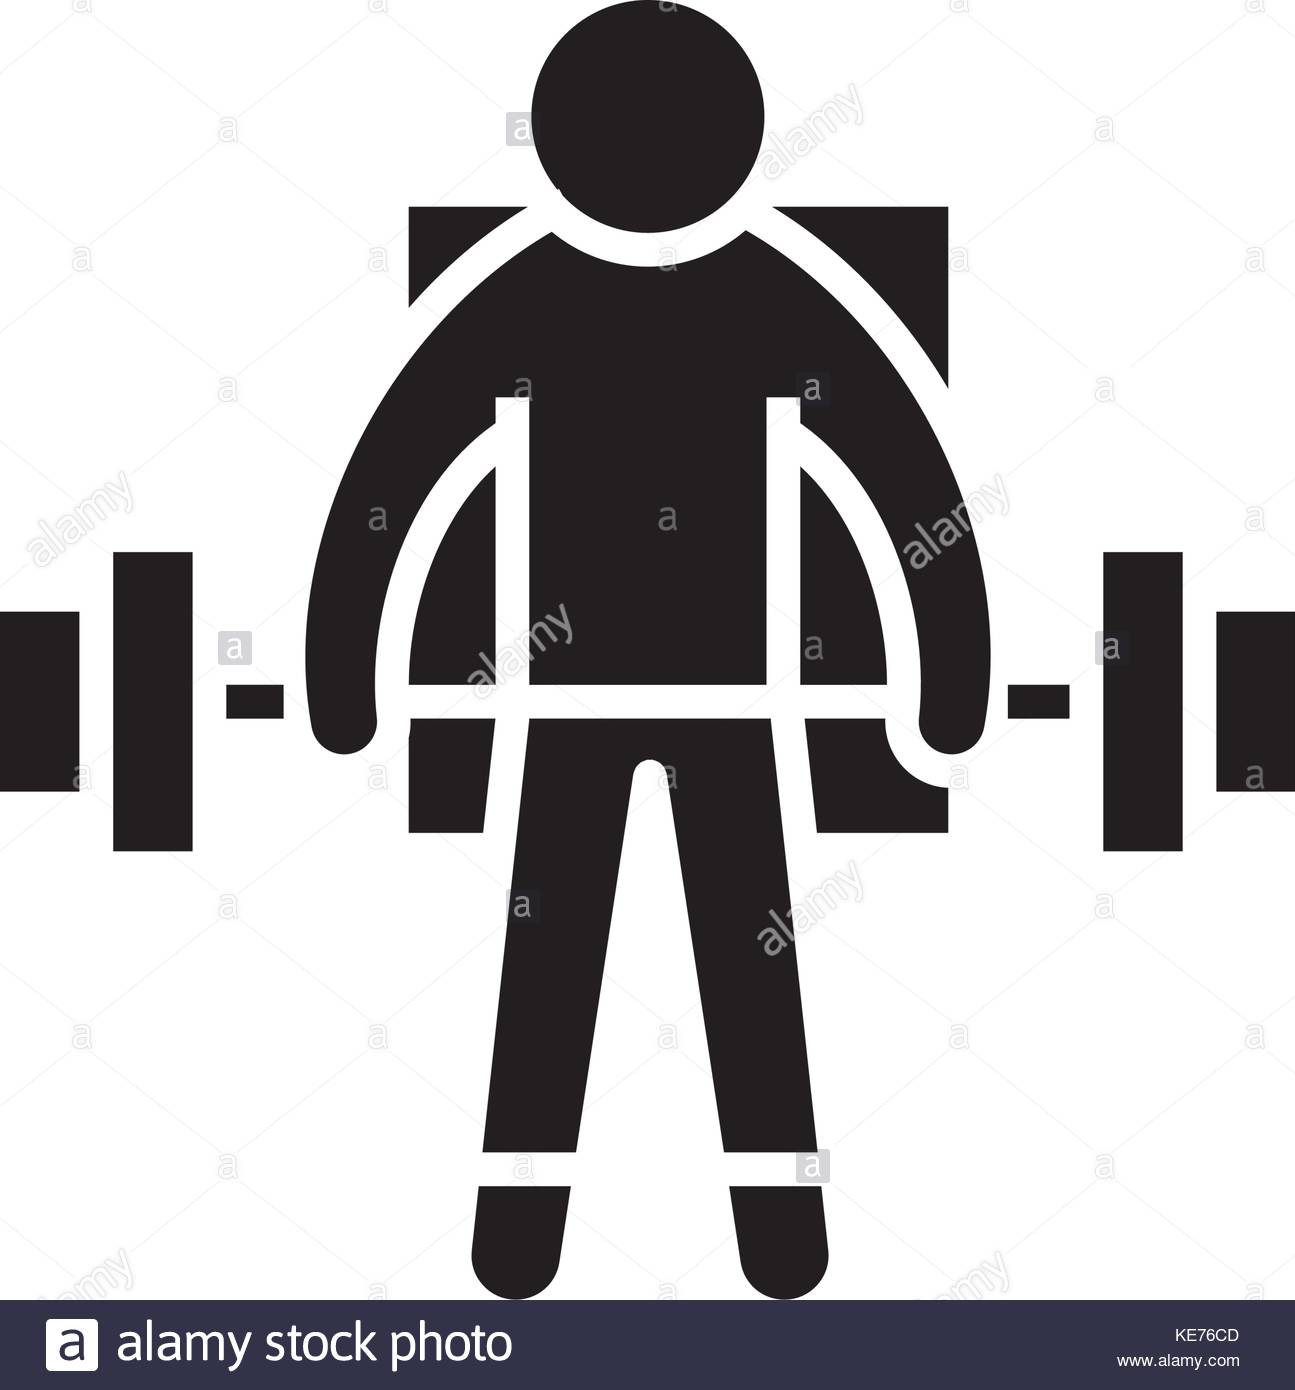 Weight-lifting icons | Noun Project